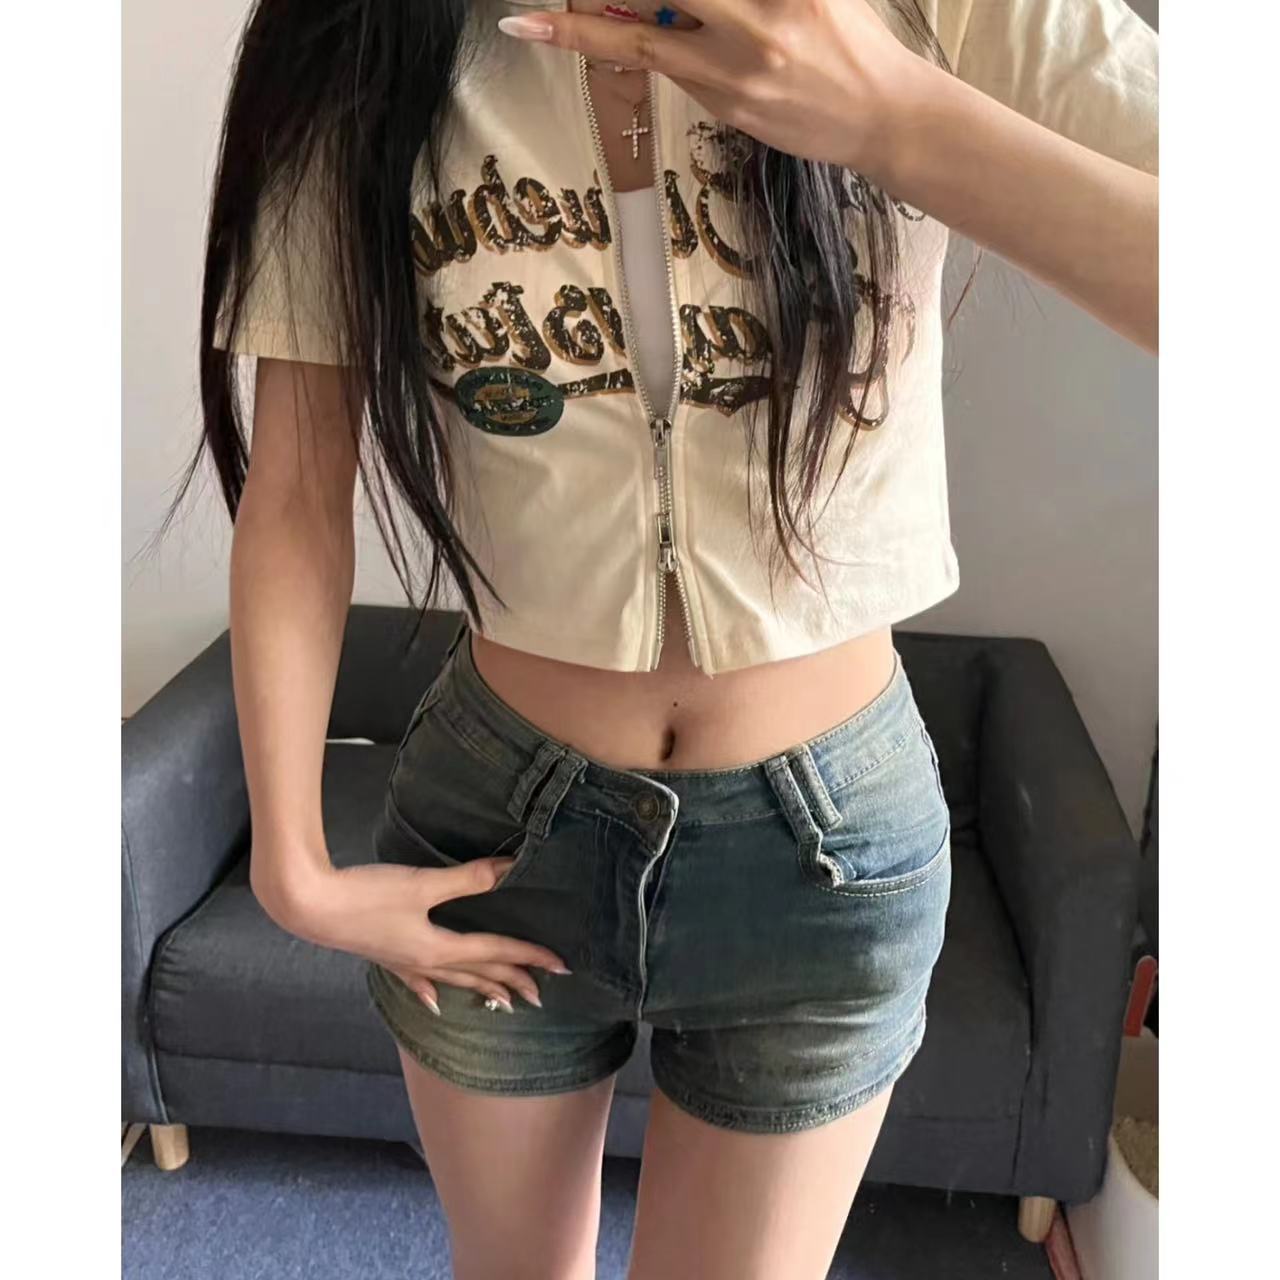 American style high waist hot girl denim shorts women's high waist washed elastic hot pants package buttocks show legs long straight tube old all-match